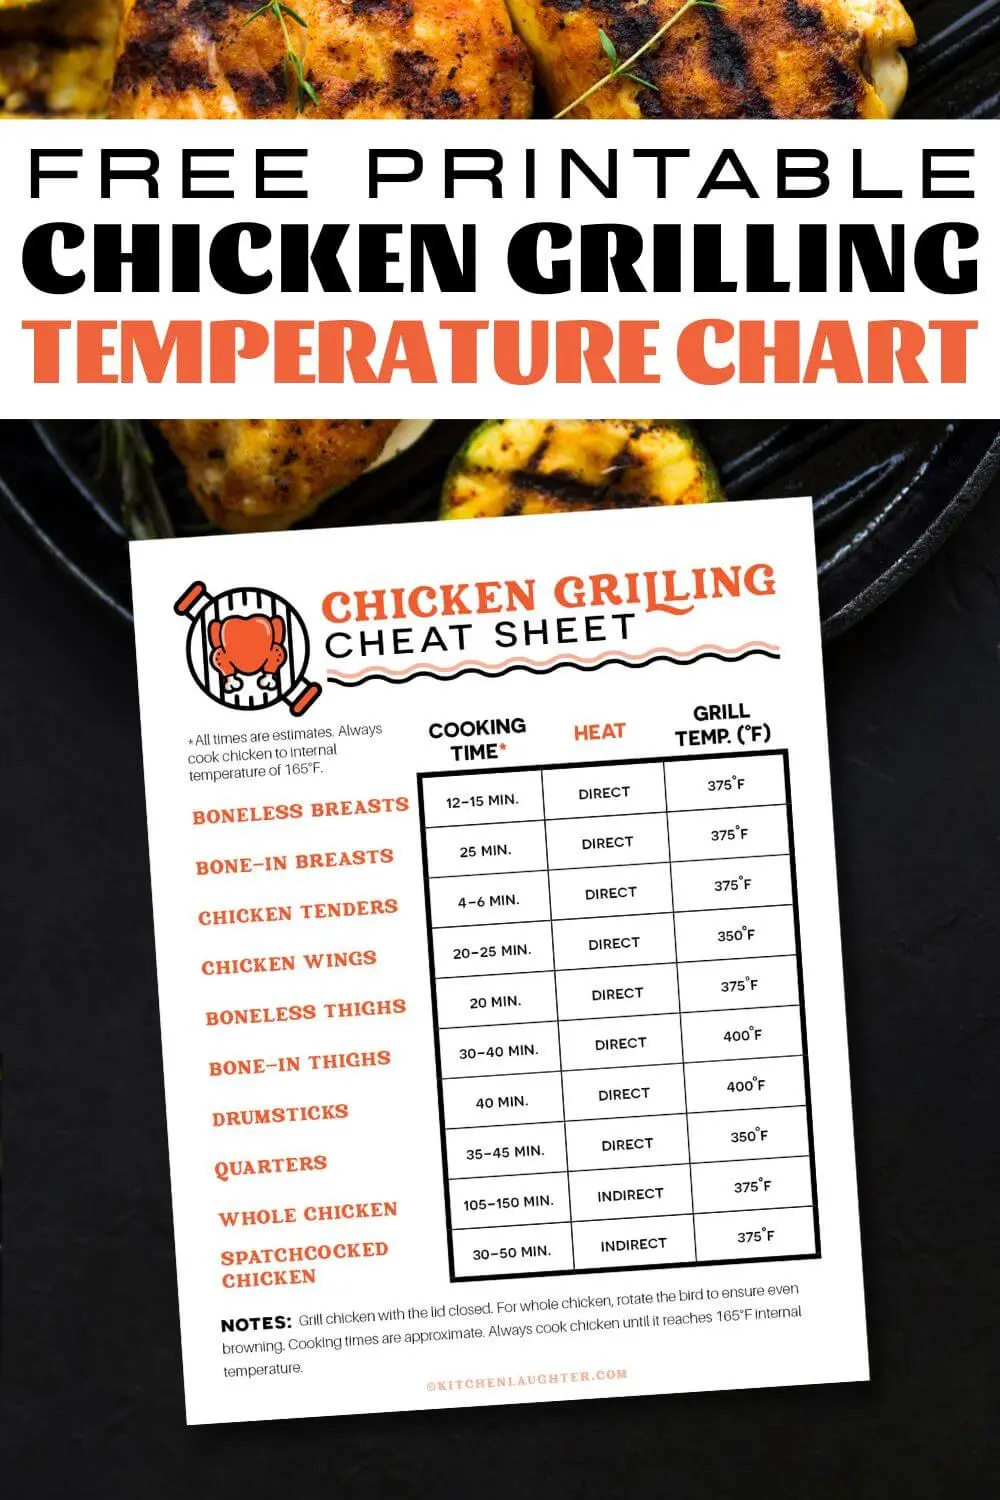 smoked chicken temperature chart - What is the best smoking temp